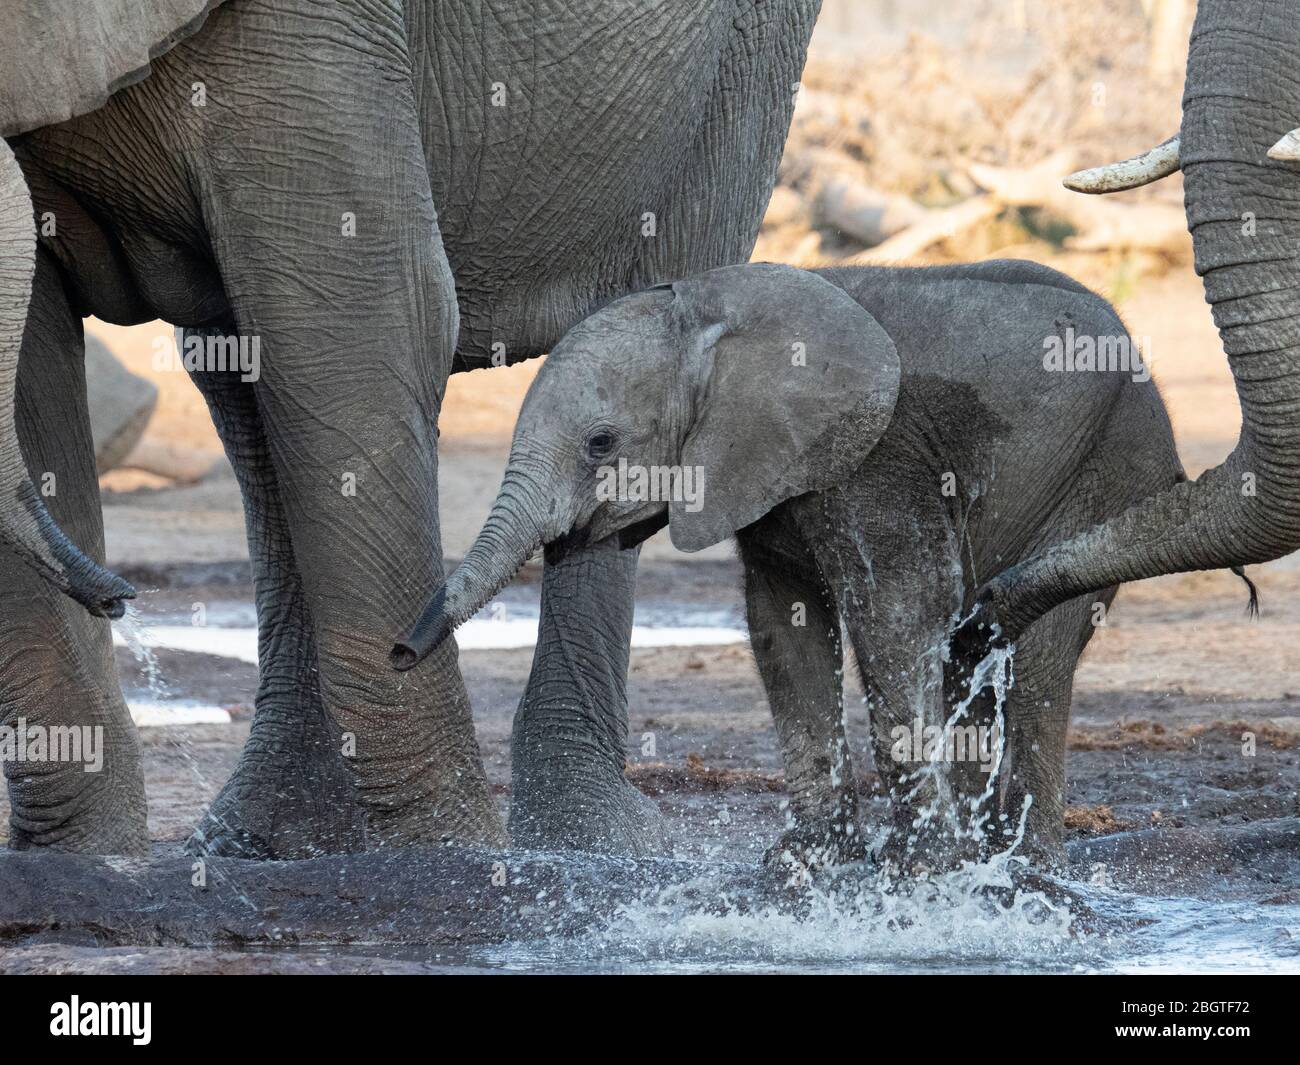 African elephants, Loxodonta africana, calf drinking at a watering hole in the Okavango Delta, Botswana, South Africa. Stock Photo